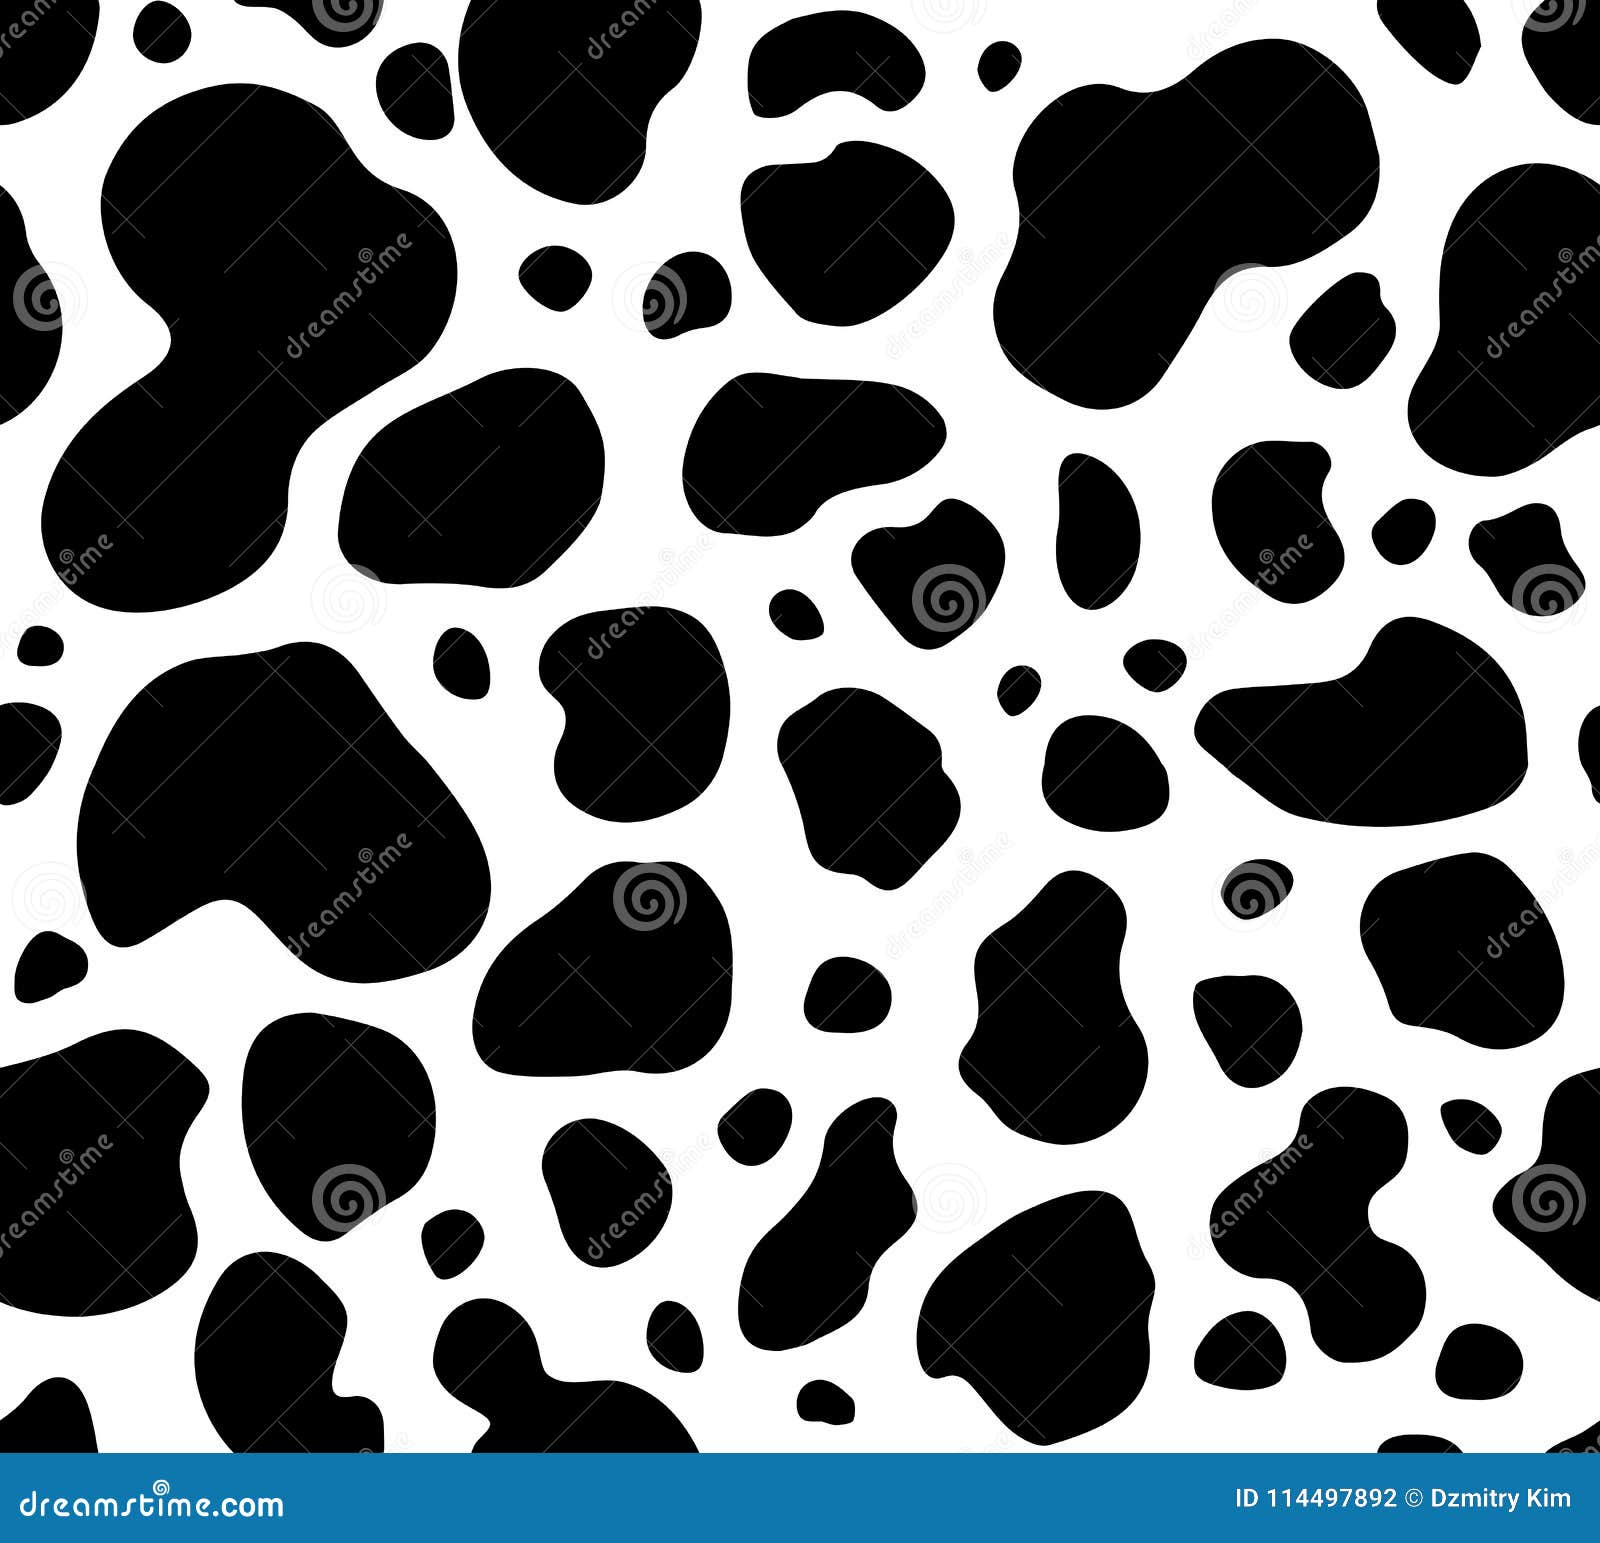 cow texture pattern repeated seamless black white animal spot